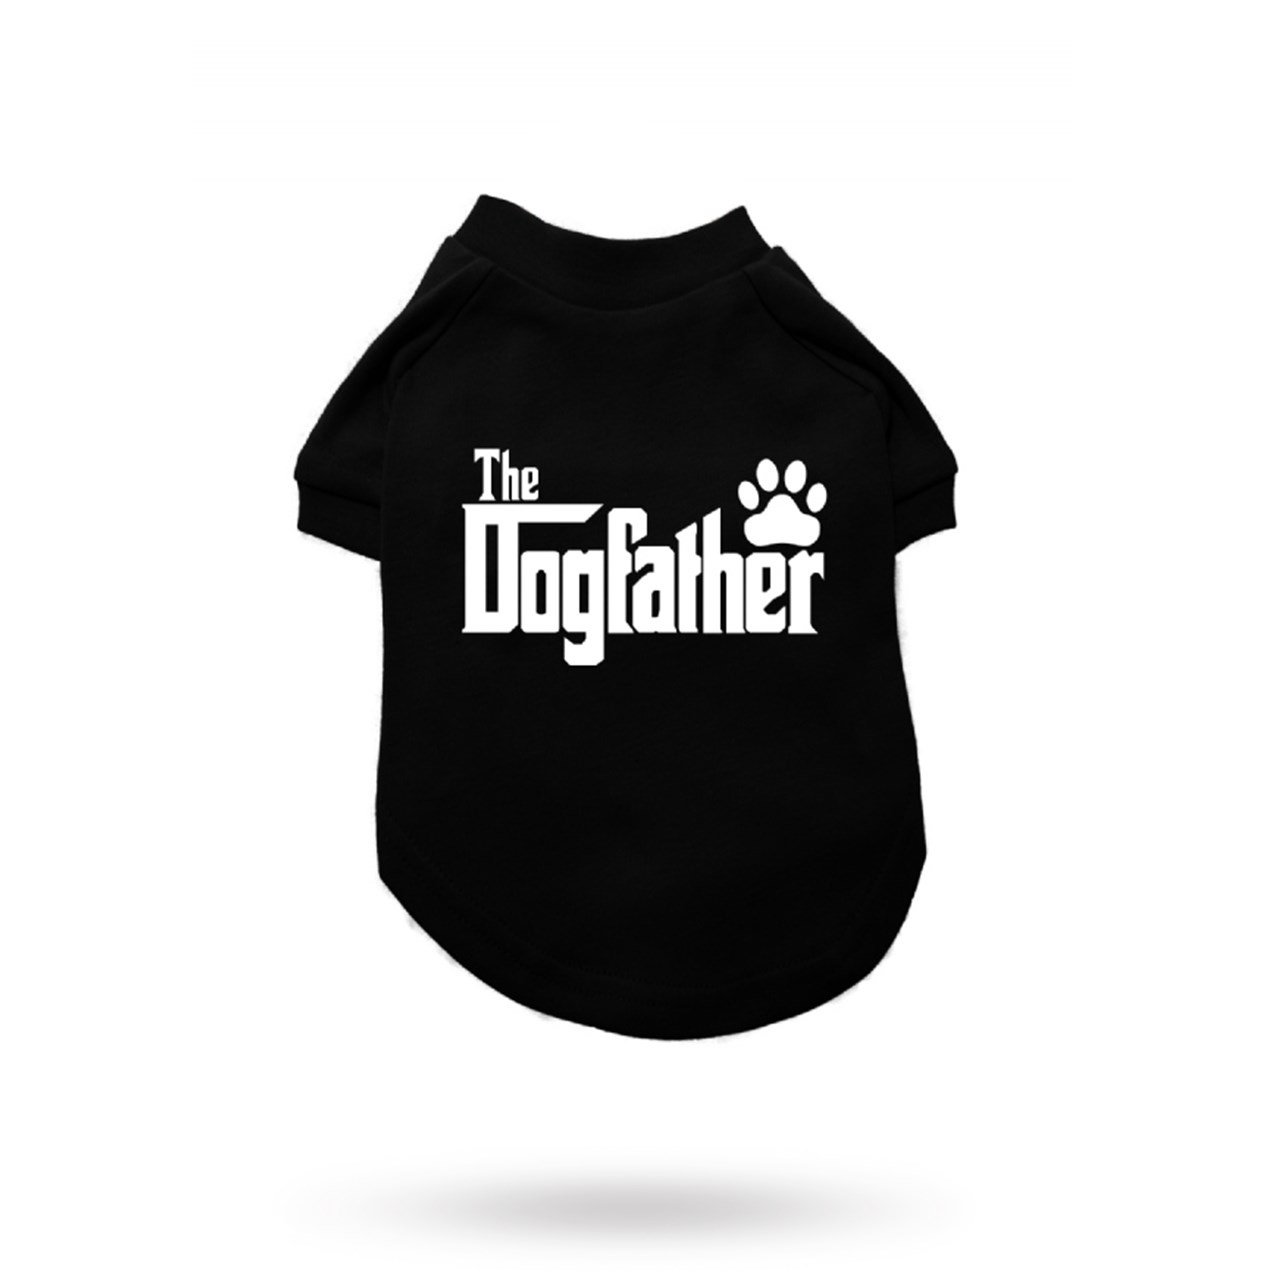 The Dogfather - T-skjorte